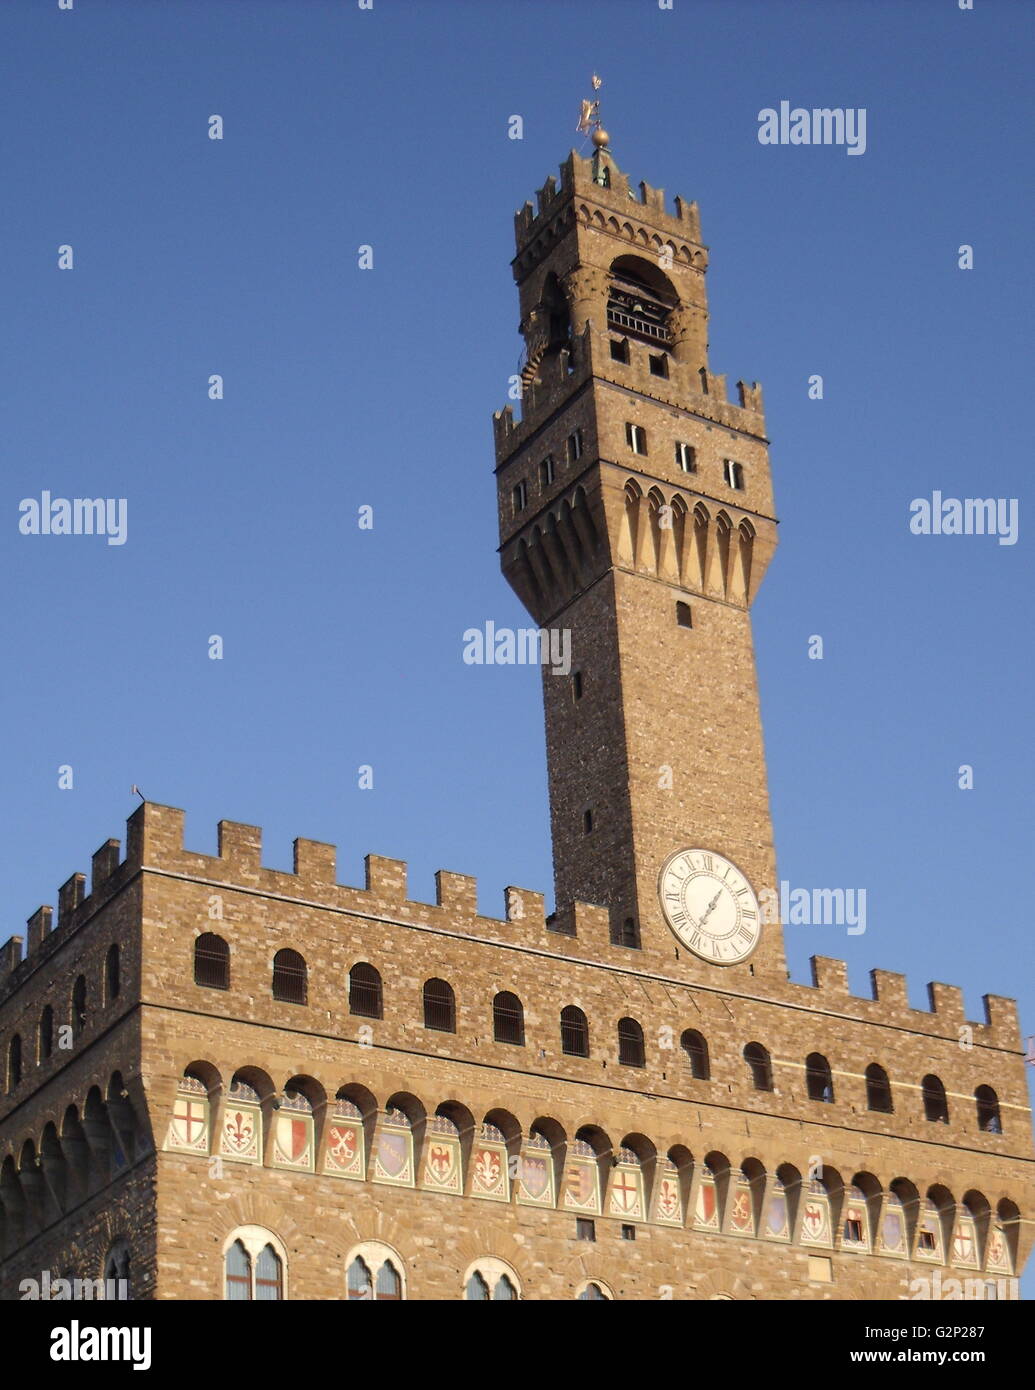 The Palazzo Vecchio. Town hall of Florence, Italy. A huge Romanesque fortress-palace overlooking the Piazza della Signoria. Designed by the architect Arnolfo di Cambio in 1299. A stonework cubicle building forms the base, crowned with a projected battlement clock tower. The current clock was made by Vincenzo Viviani in 1667. Arches in the structure are decorated with the 9 coats of arms of the Florentine Republic. Stock Photo